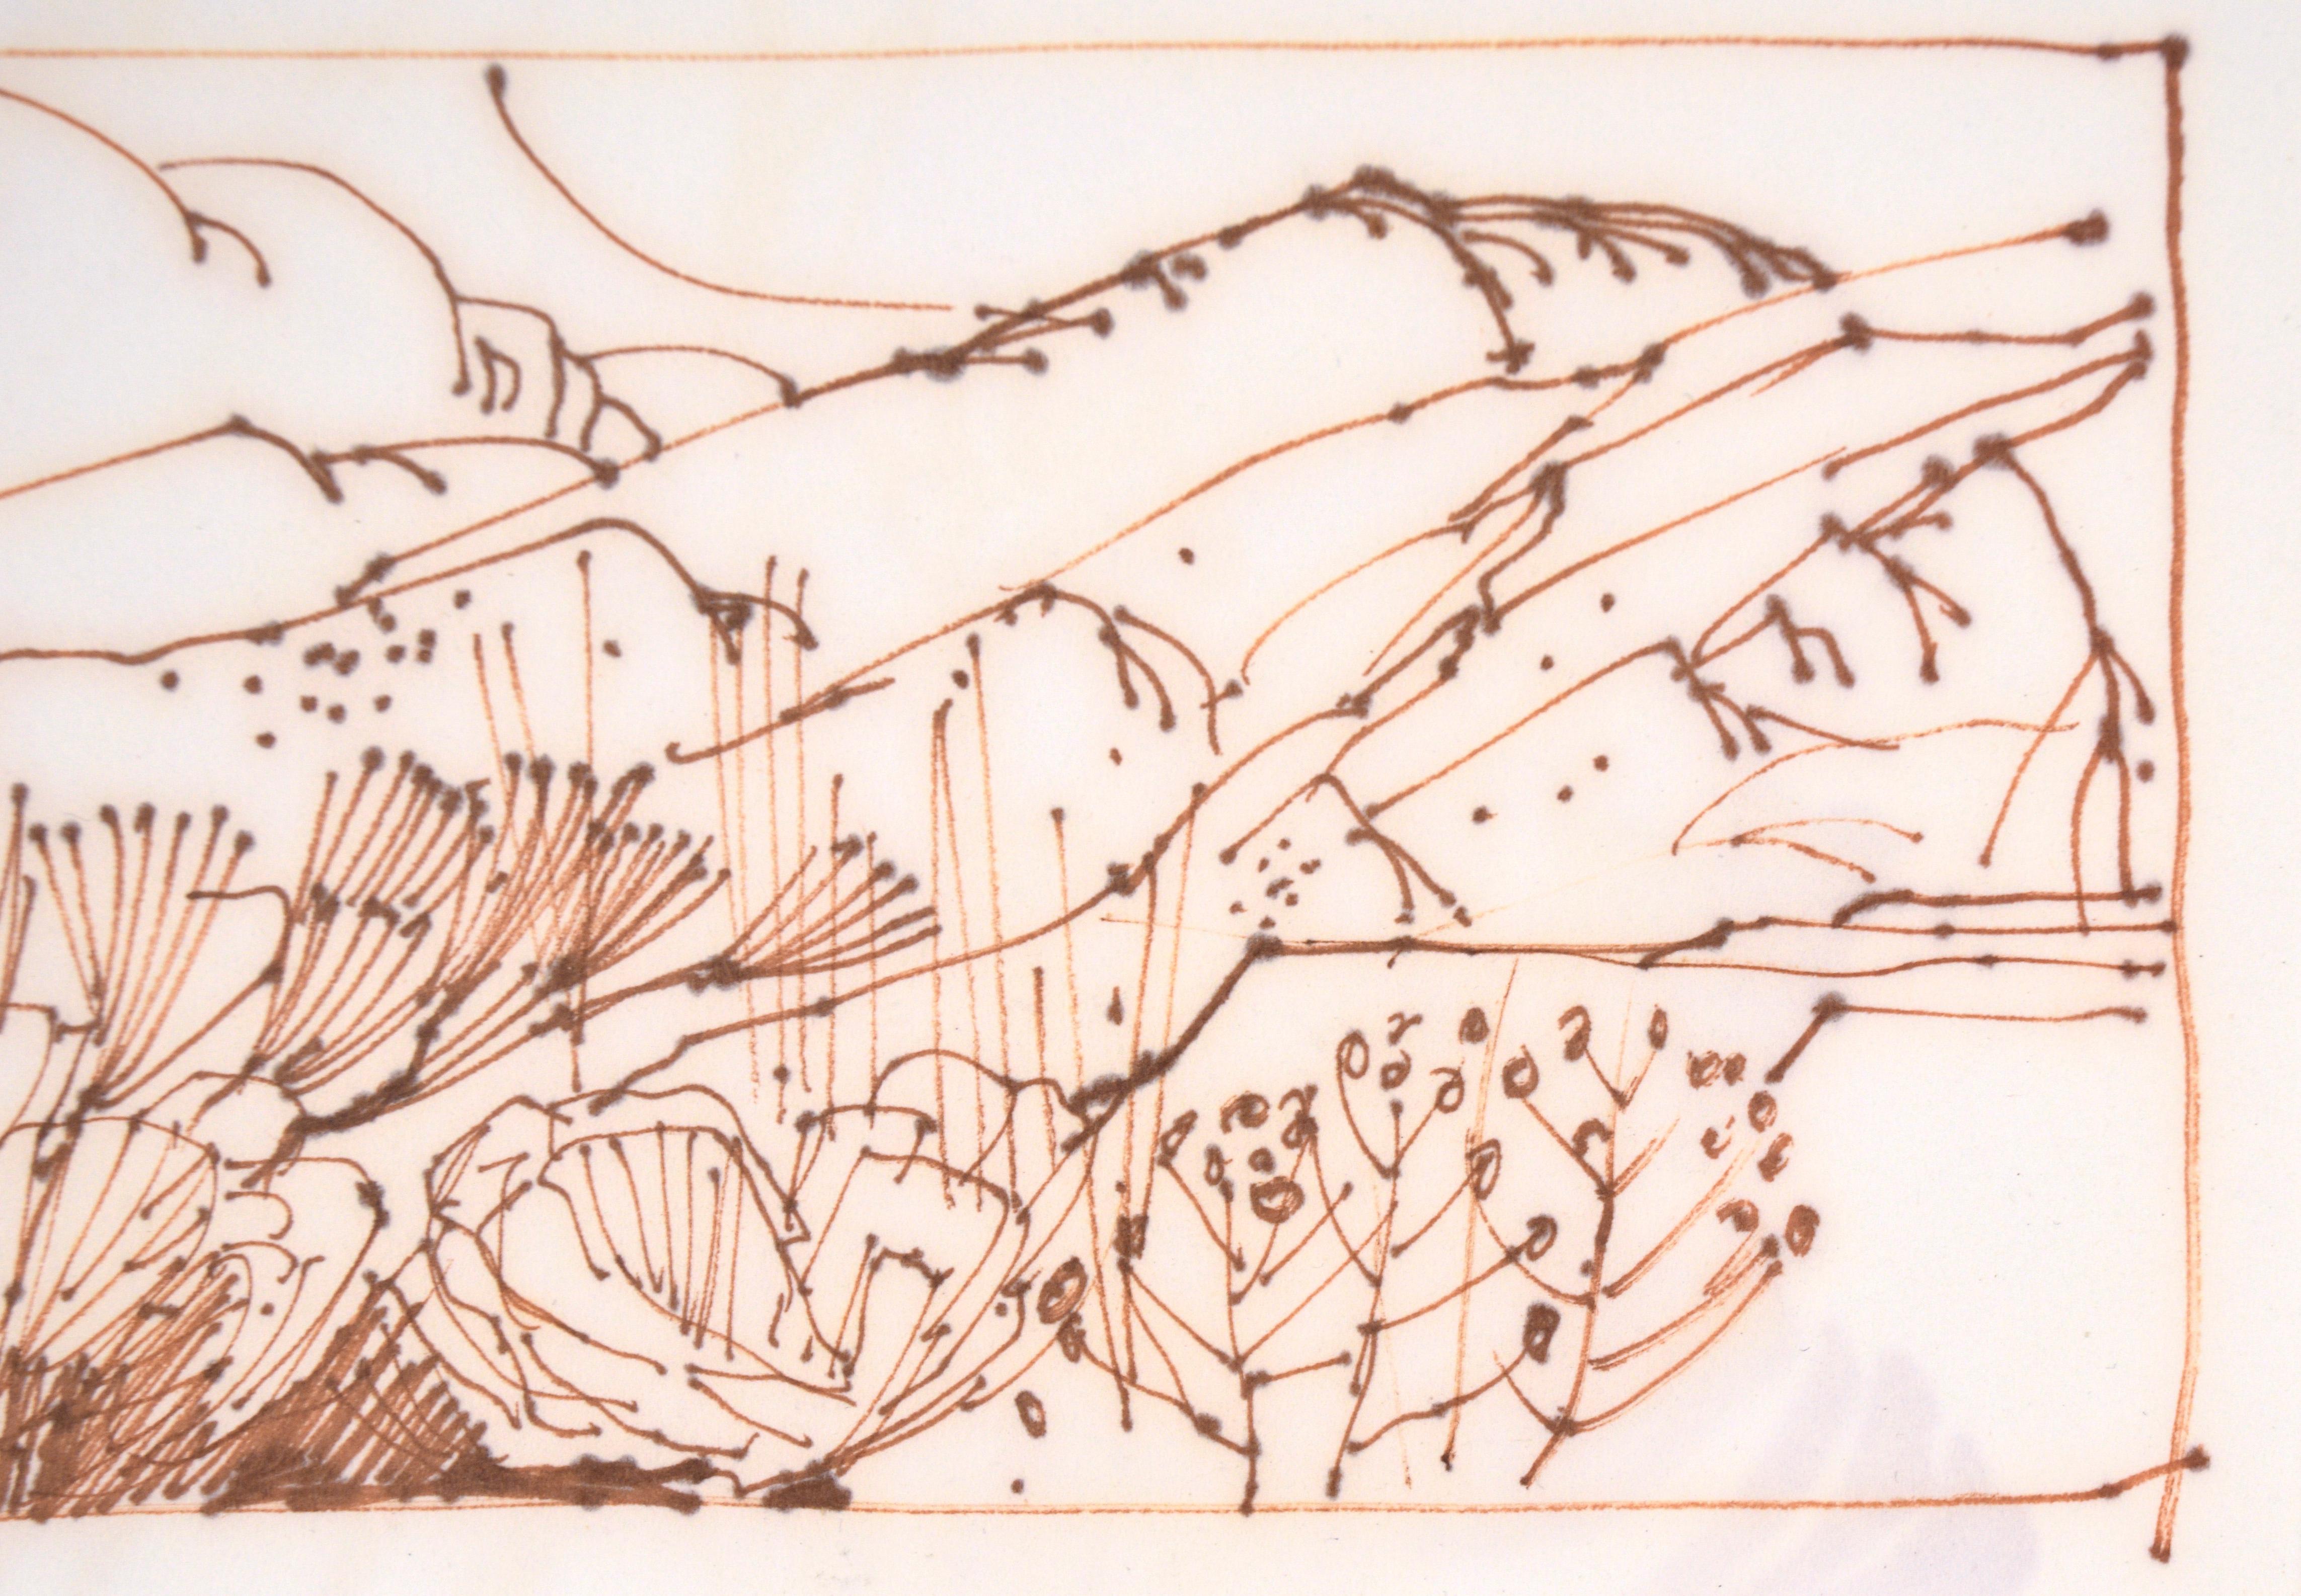 Two High Desert Landscapes - Line Drawing in Sepia-Toned Ink on Paper For Sale 2